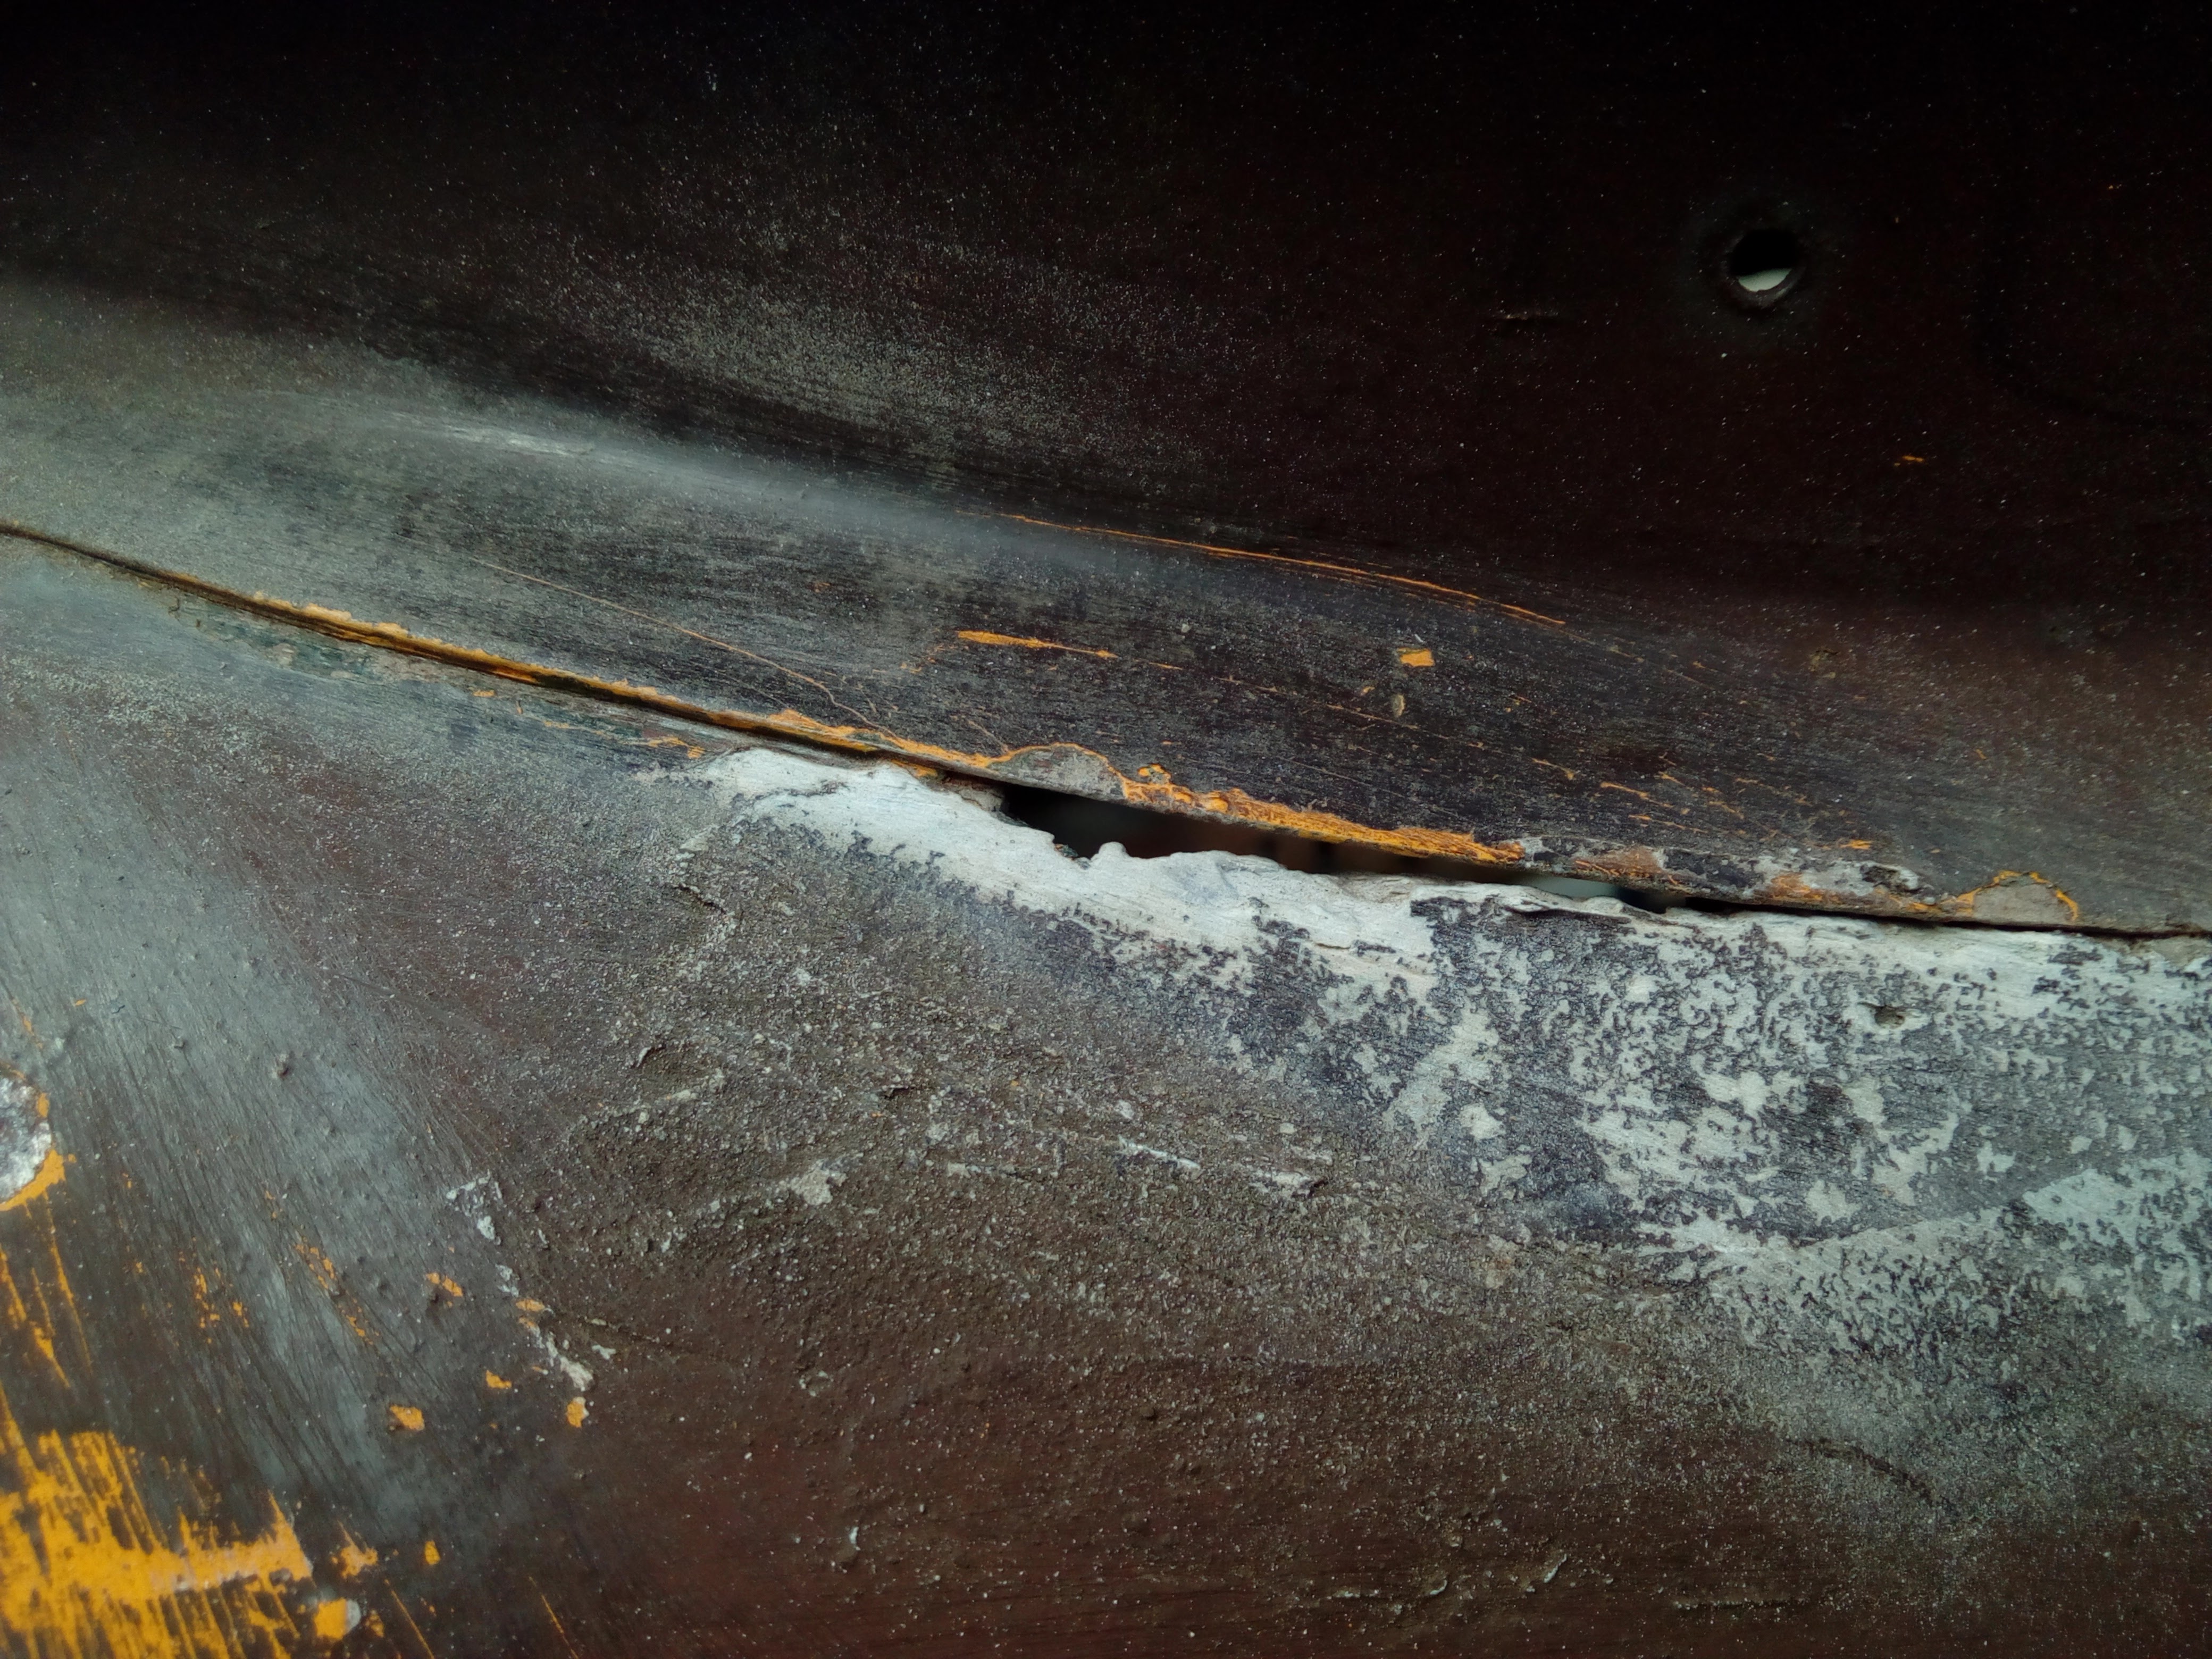 Close-ups of the body-filled rust holes around the edge of the roof 'turret'